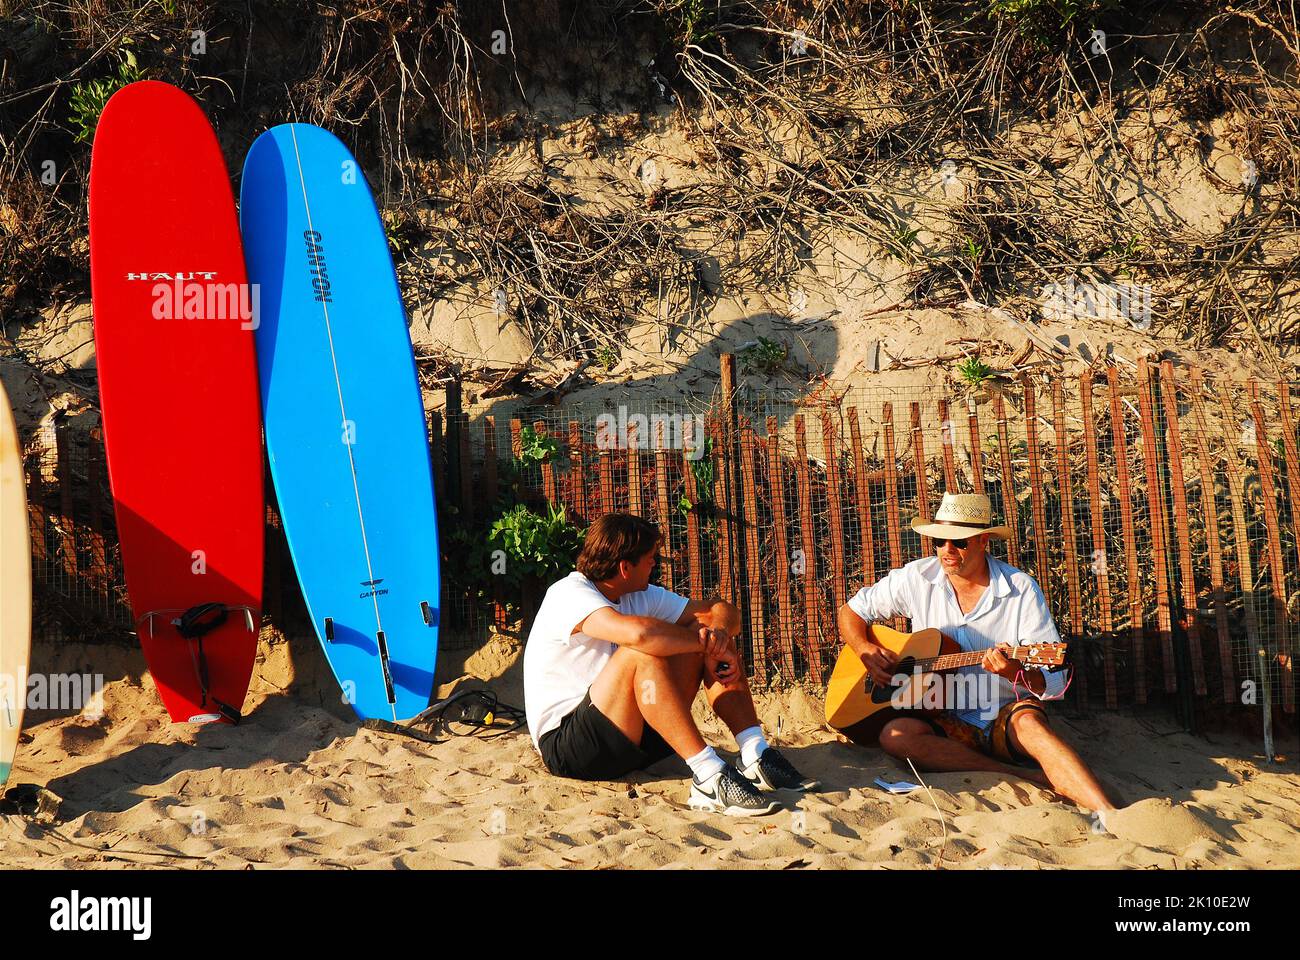 Two adult men sing and play guitar on the beach with their surfboards behinds them on a sunny summer vacation day Stock Photo